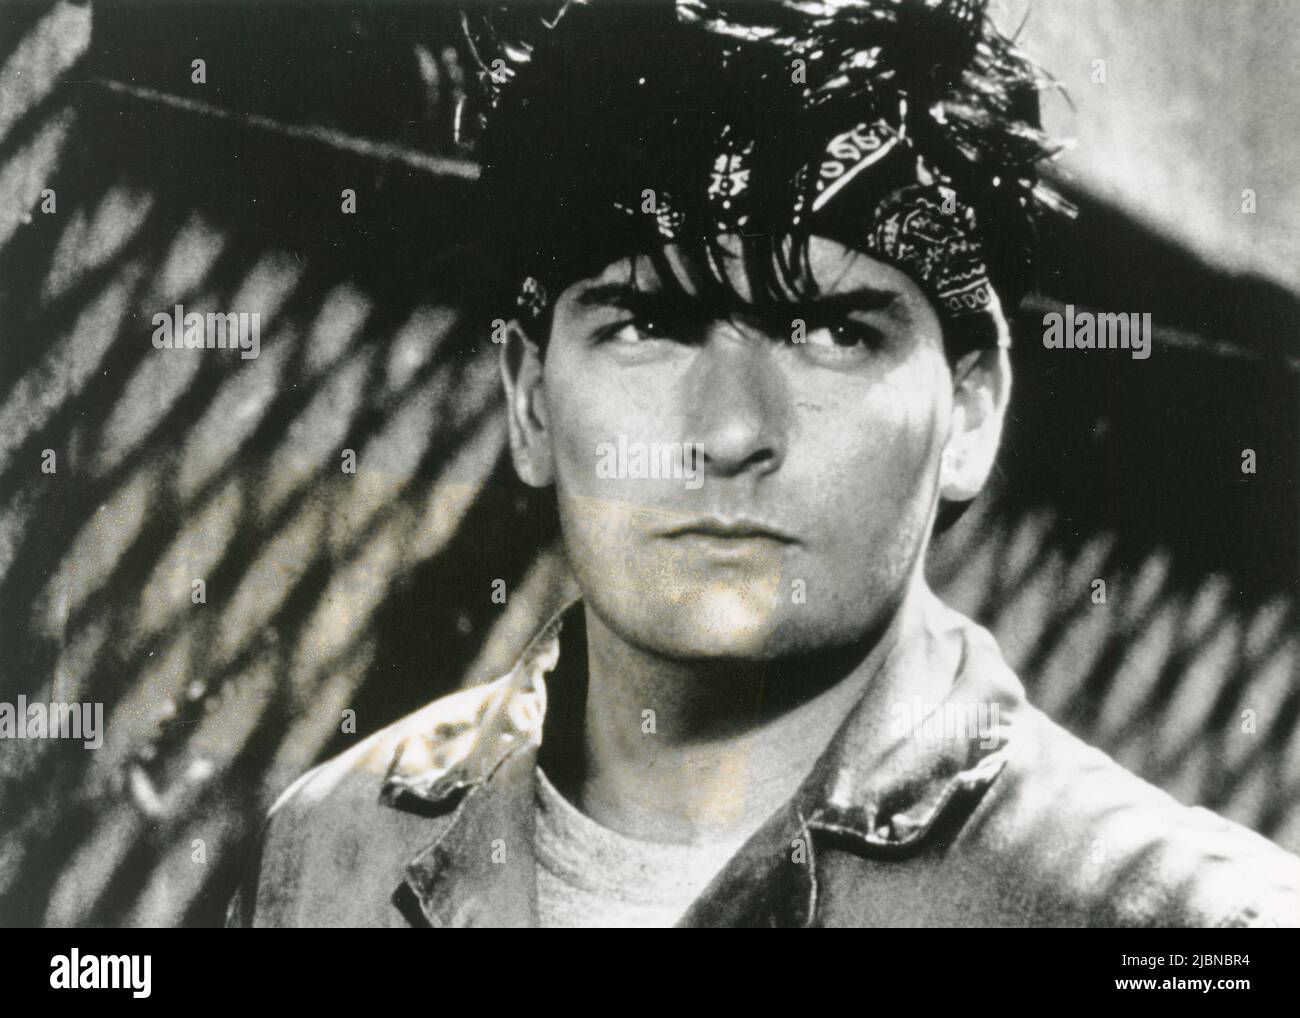 American actor Charlie Sheen in the movie Men At Work, 1990 Stock Photo